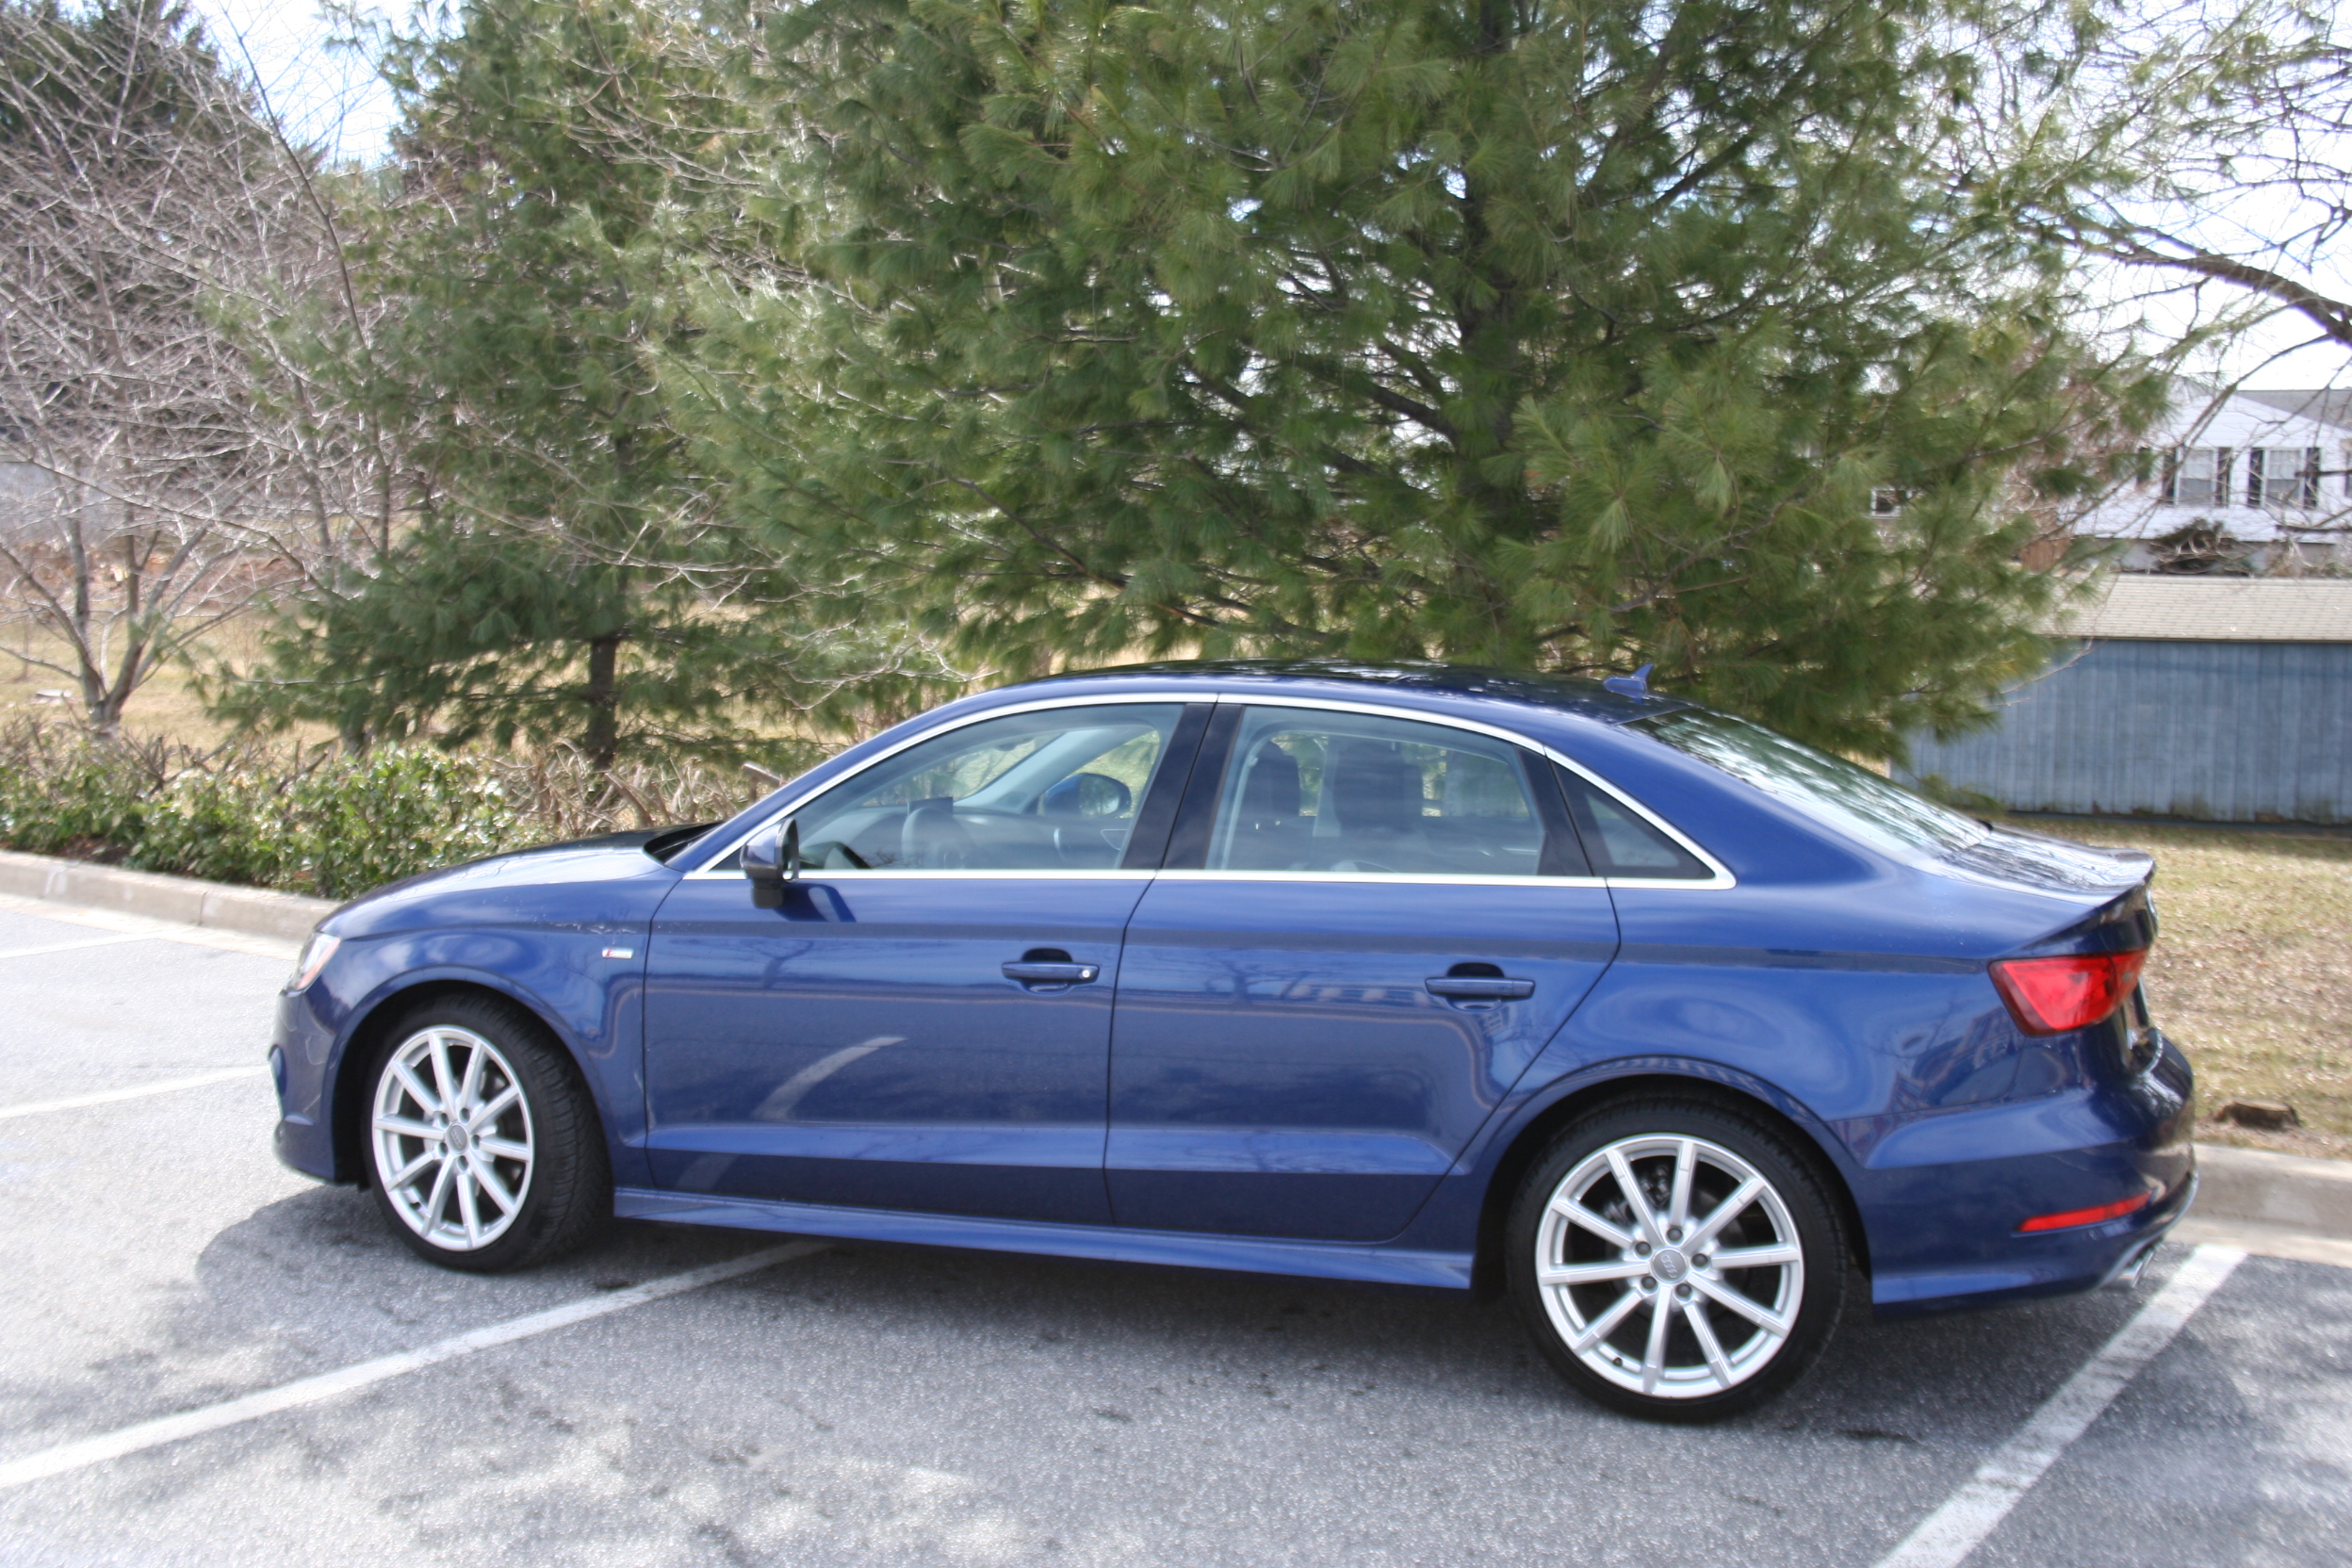 The 2015 Audi A3 TDI: A fuel-efficient sedan with luxury features